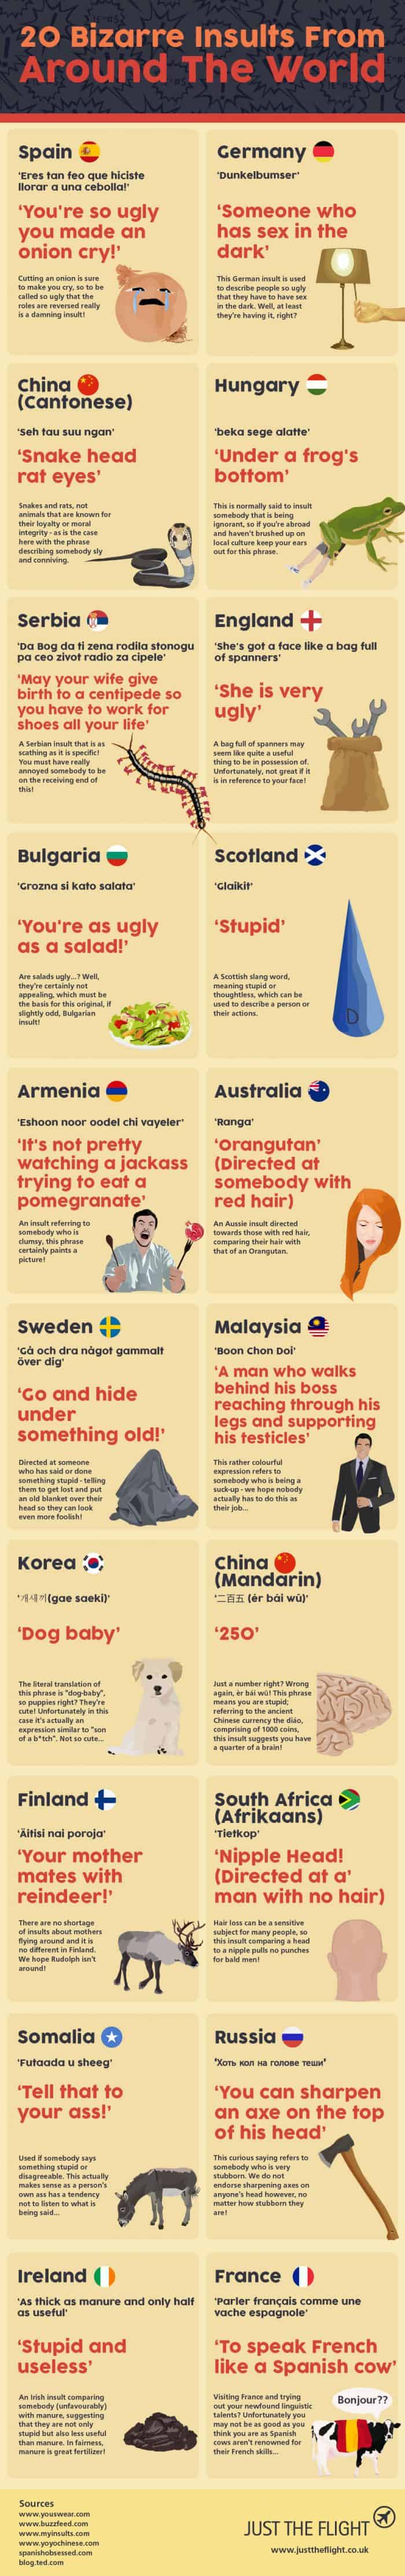 These insults from around the world need some explaining